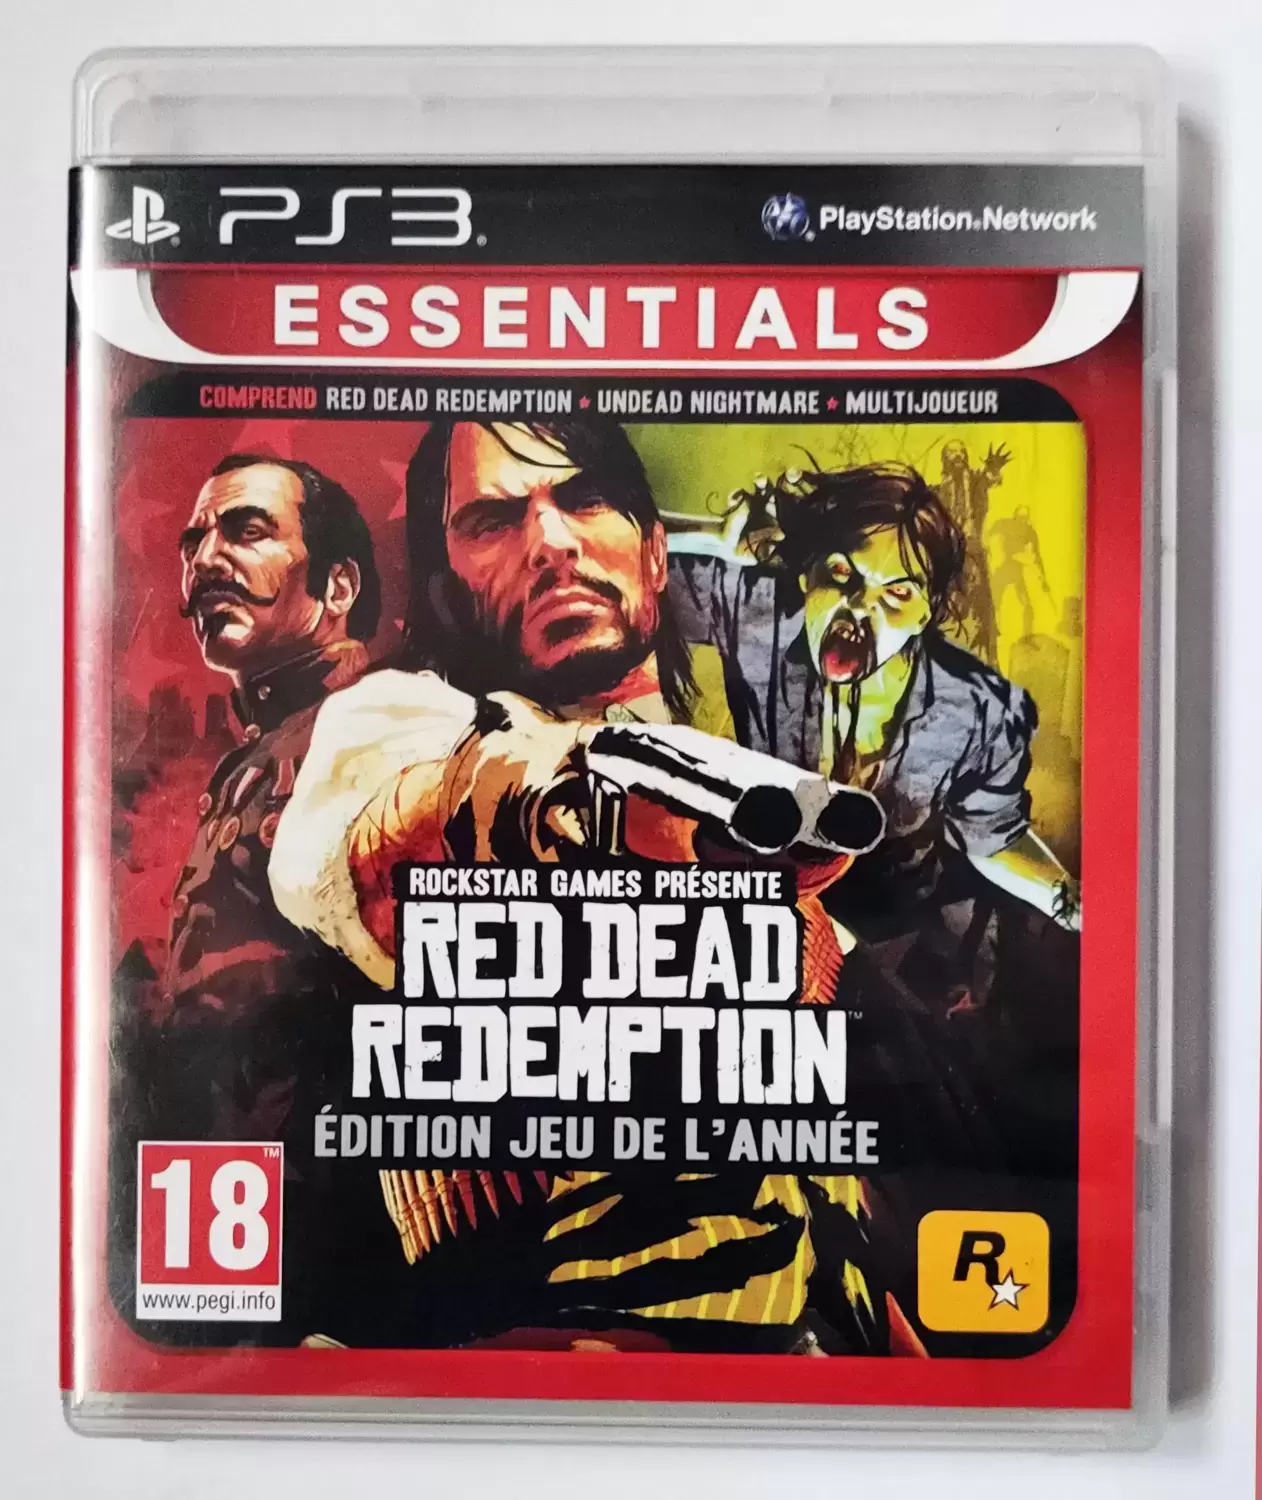 PS3 Games - Red Dead Redemption - Essential